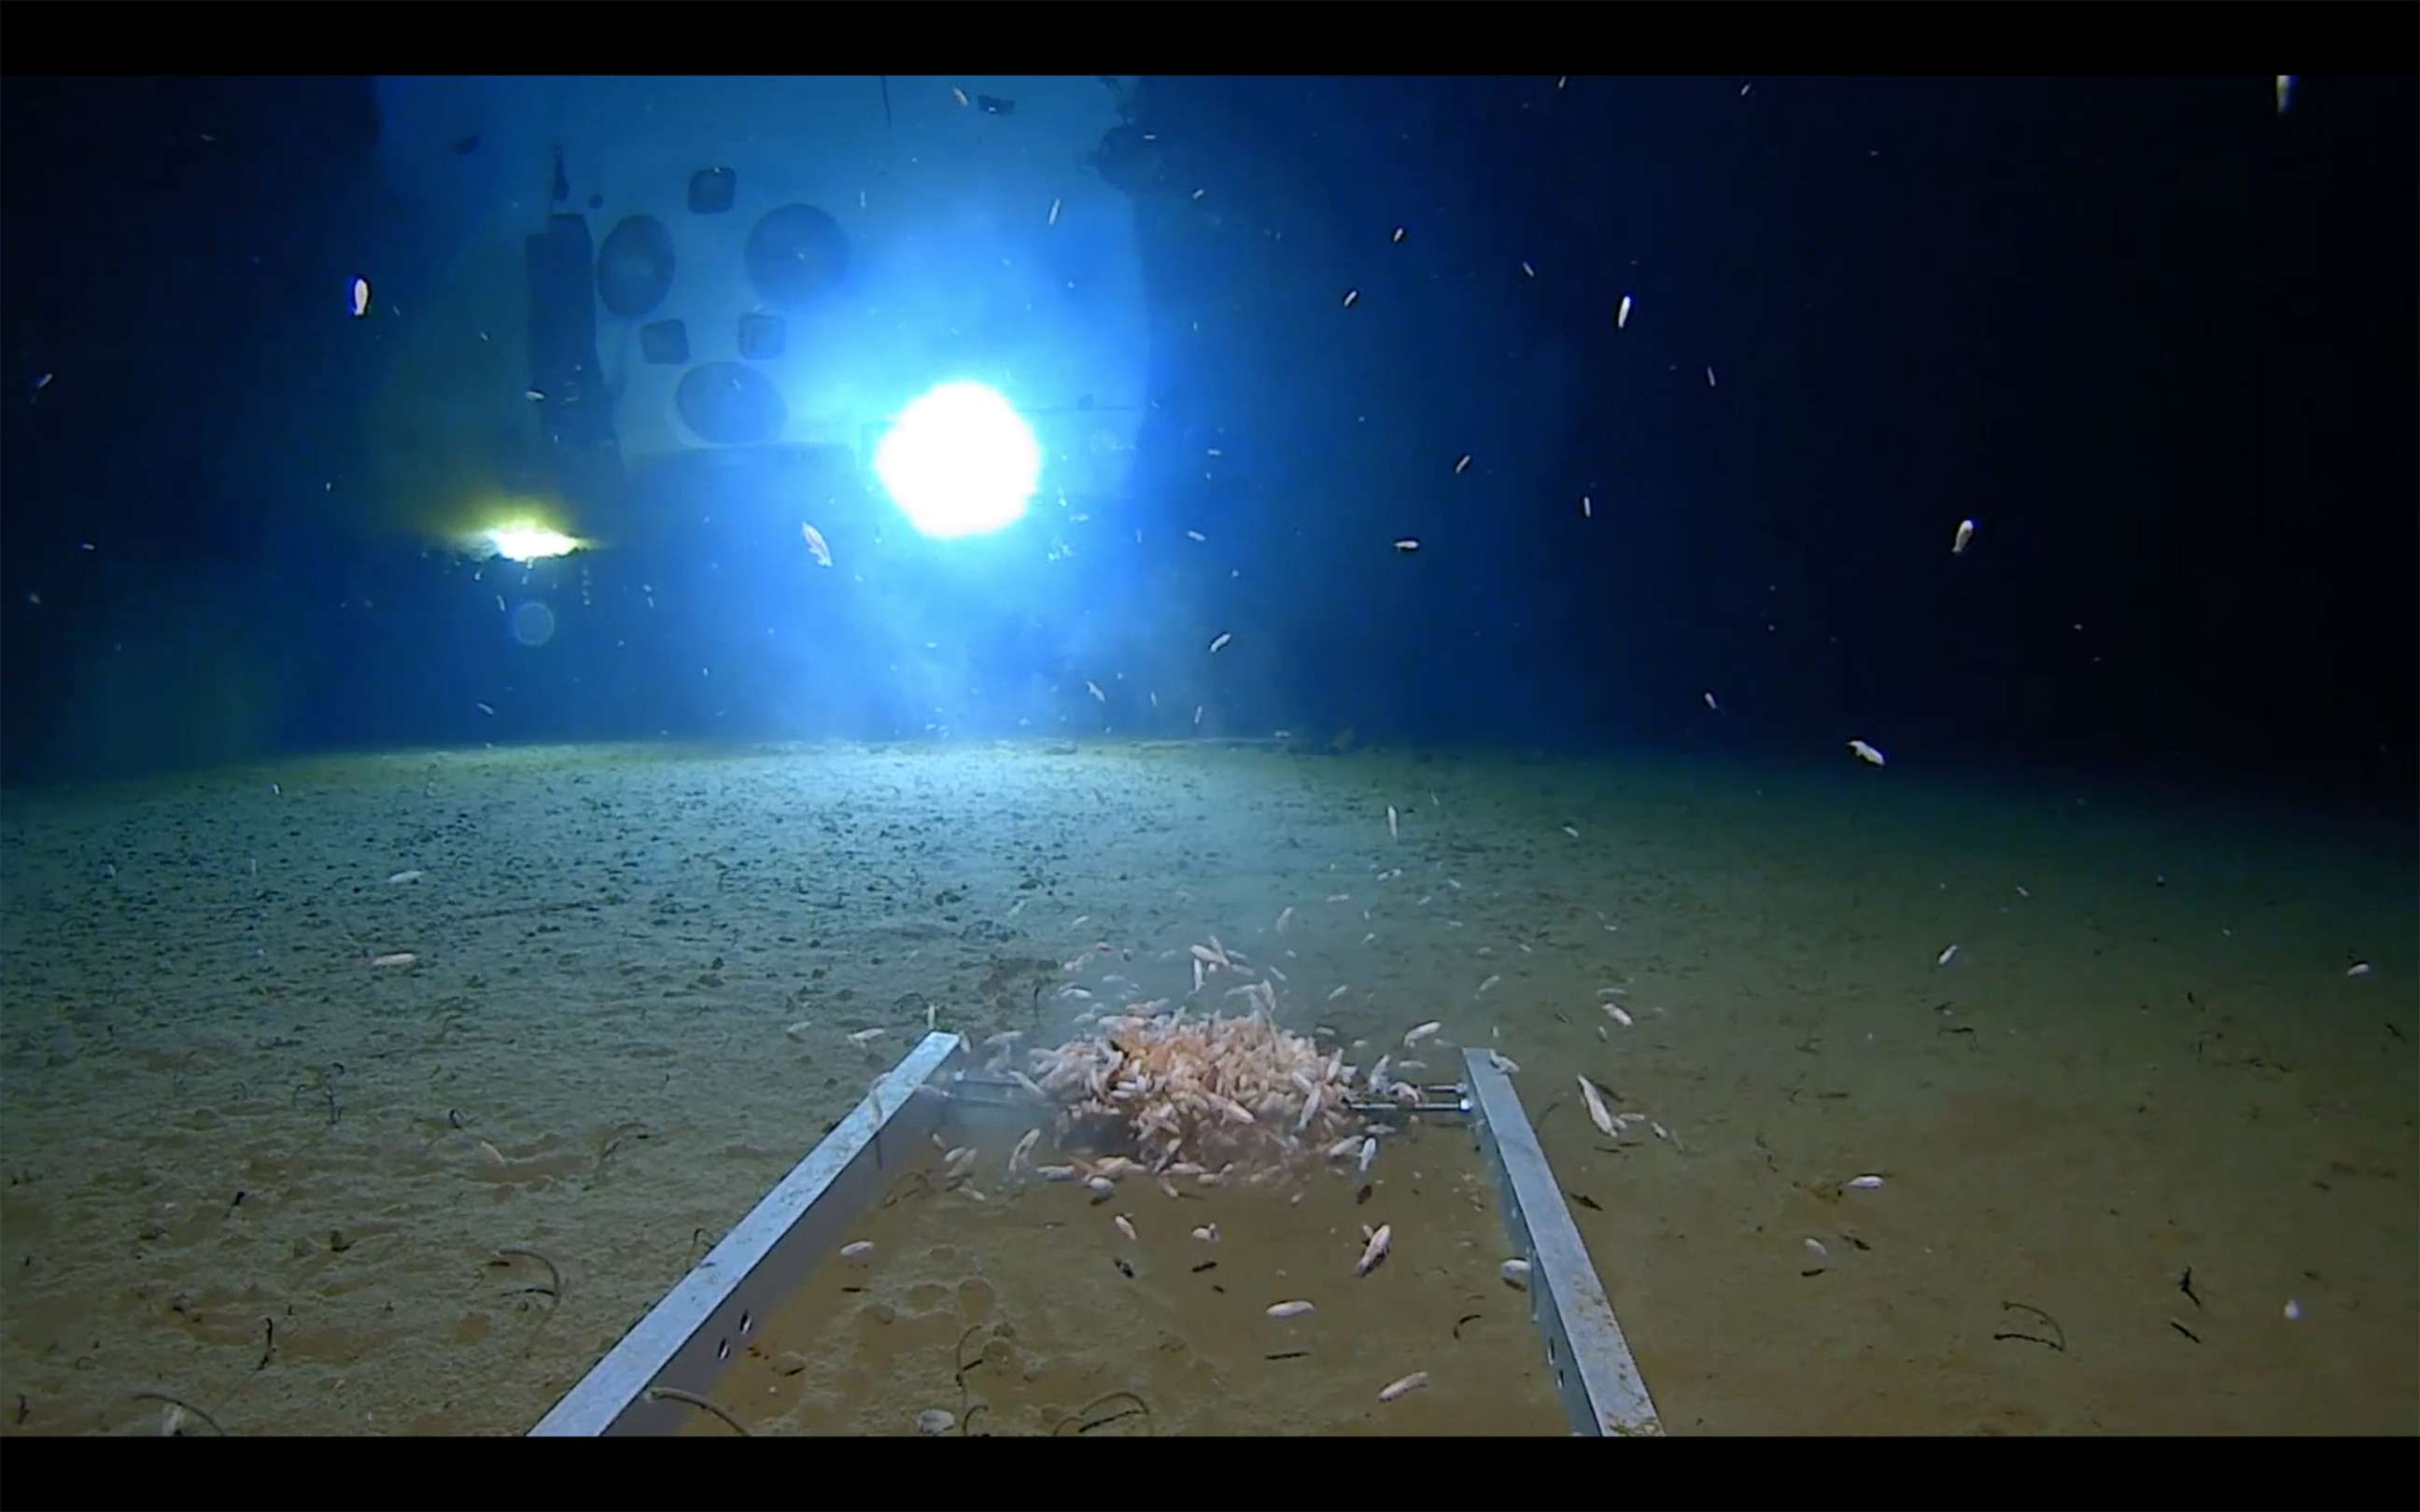 PHOTO: View from "Limiting Factor" submarine during a Mariana Trench dive.